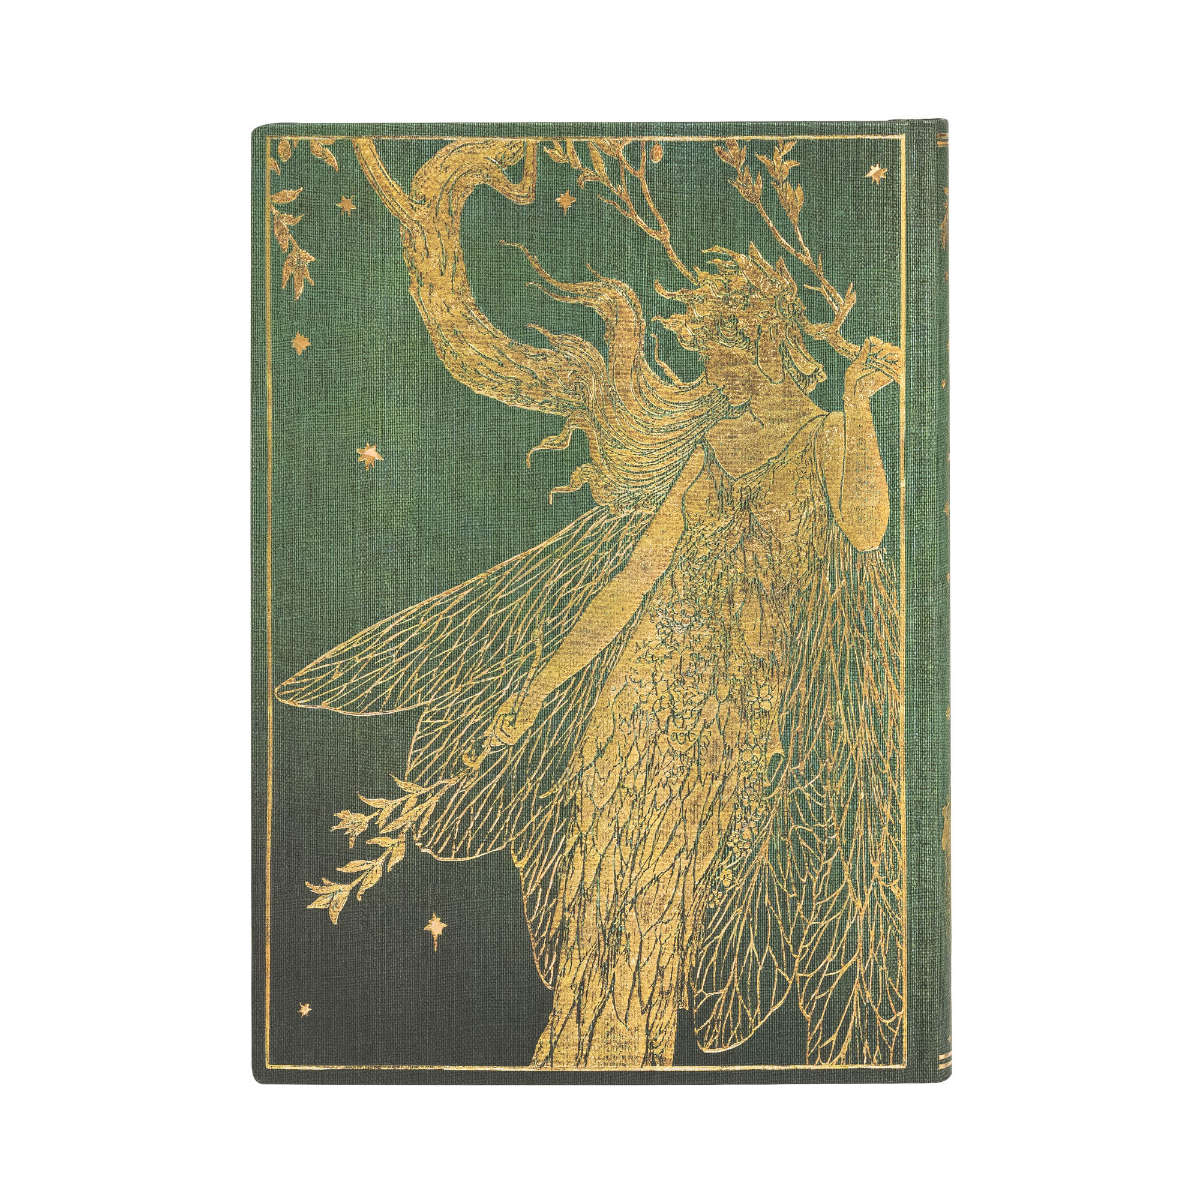 Paperblanks Lang's Olive Fairy Midi 5 x 7 Inch Journal